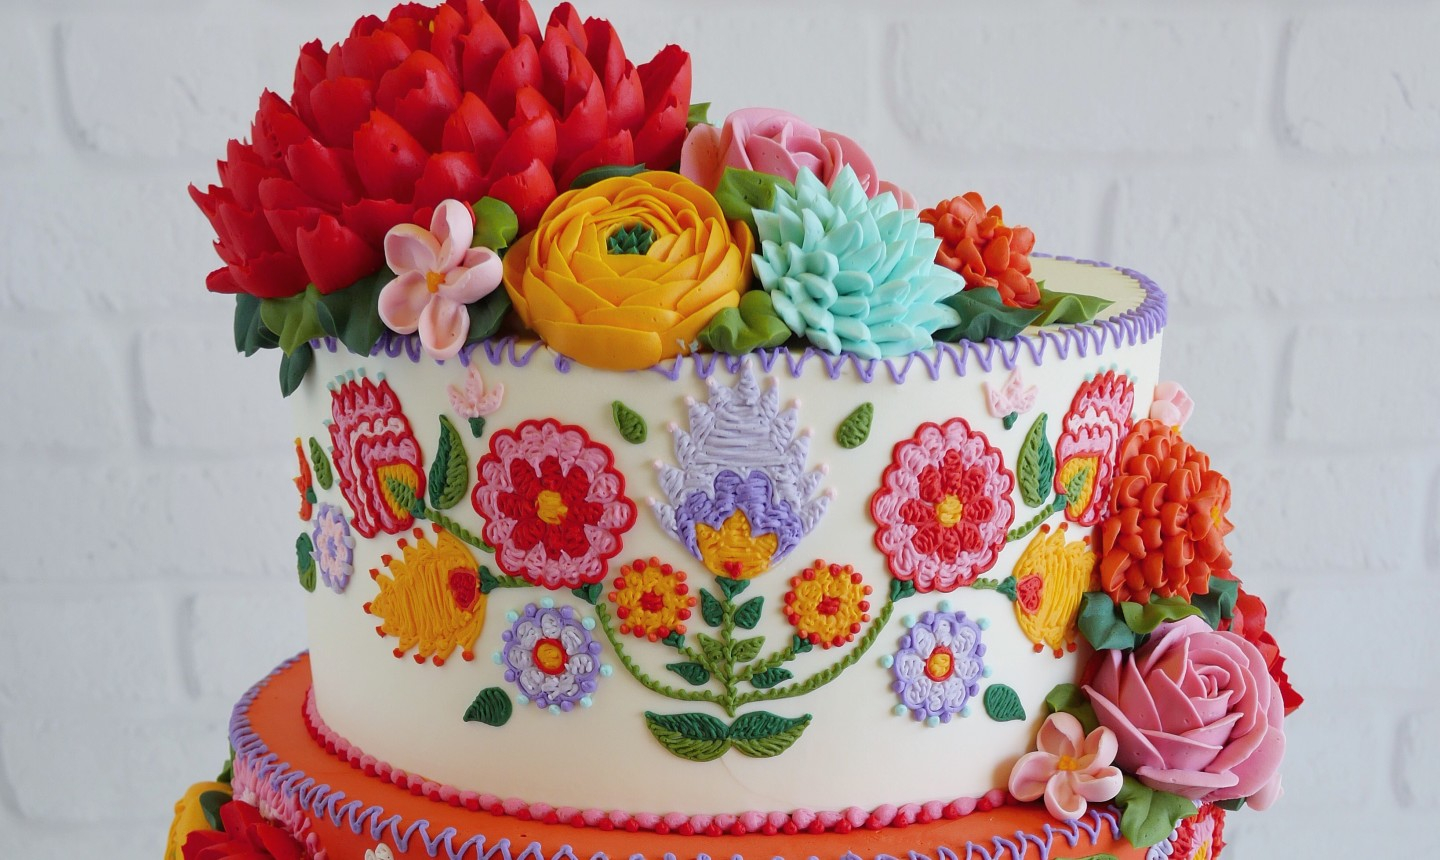 Mexican Embroidery Patterns Viva La Cake Meet The Maker Of Igs Favorite Mexican Embroidery Cakes